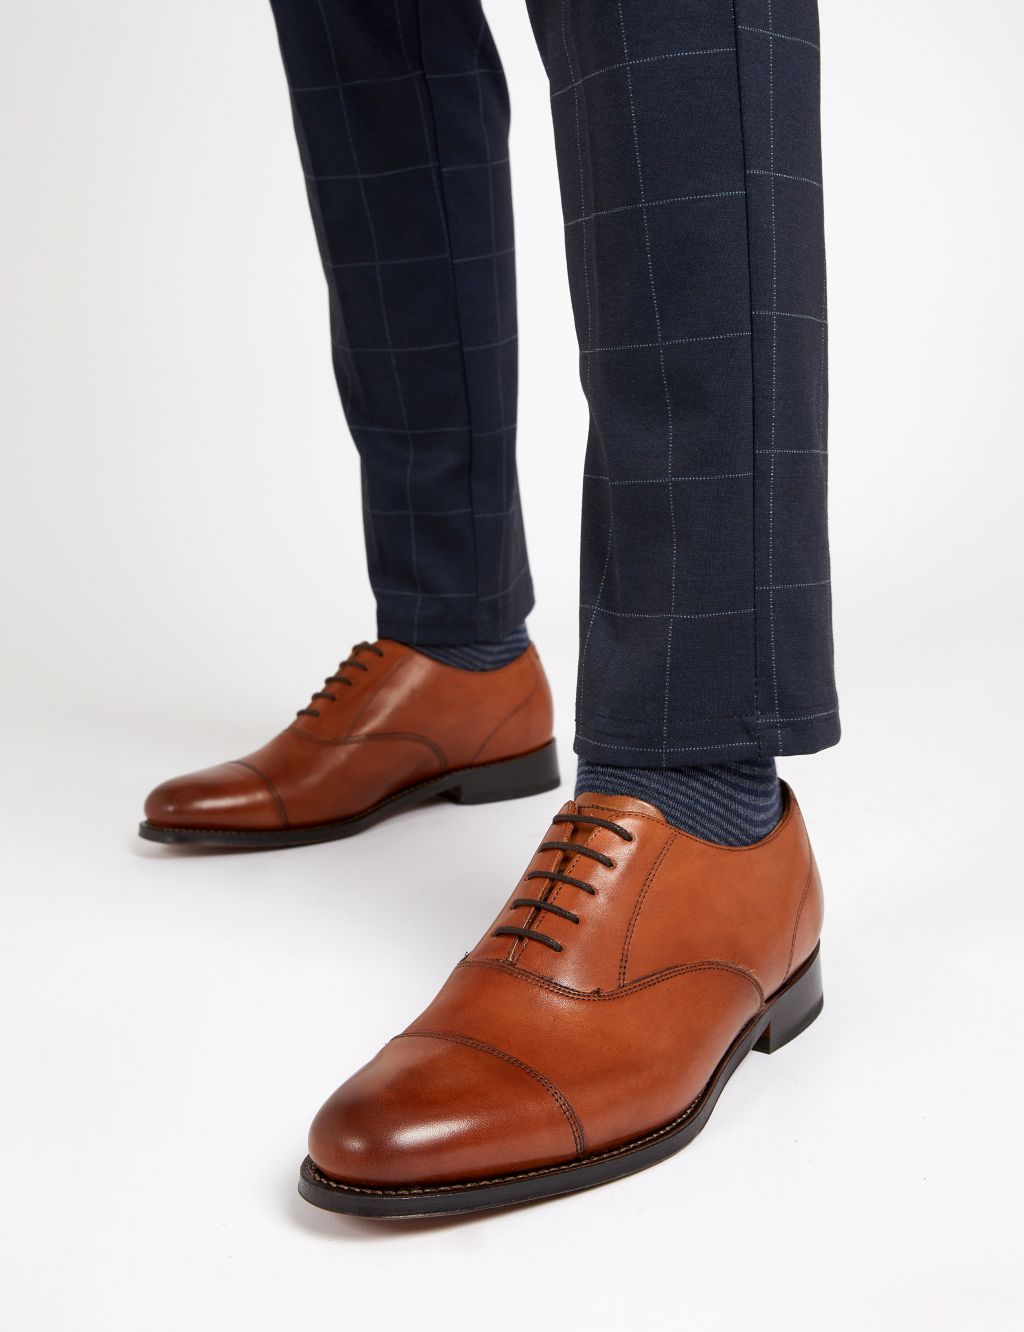 Leather Goodyear Welted Oxford Shoes image 1